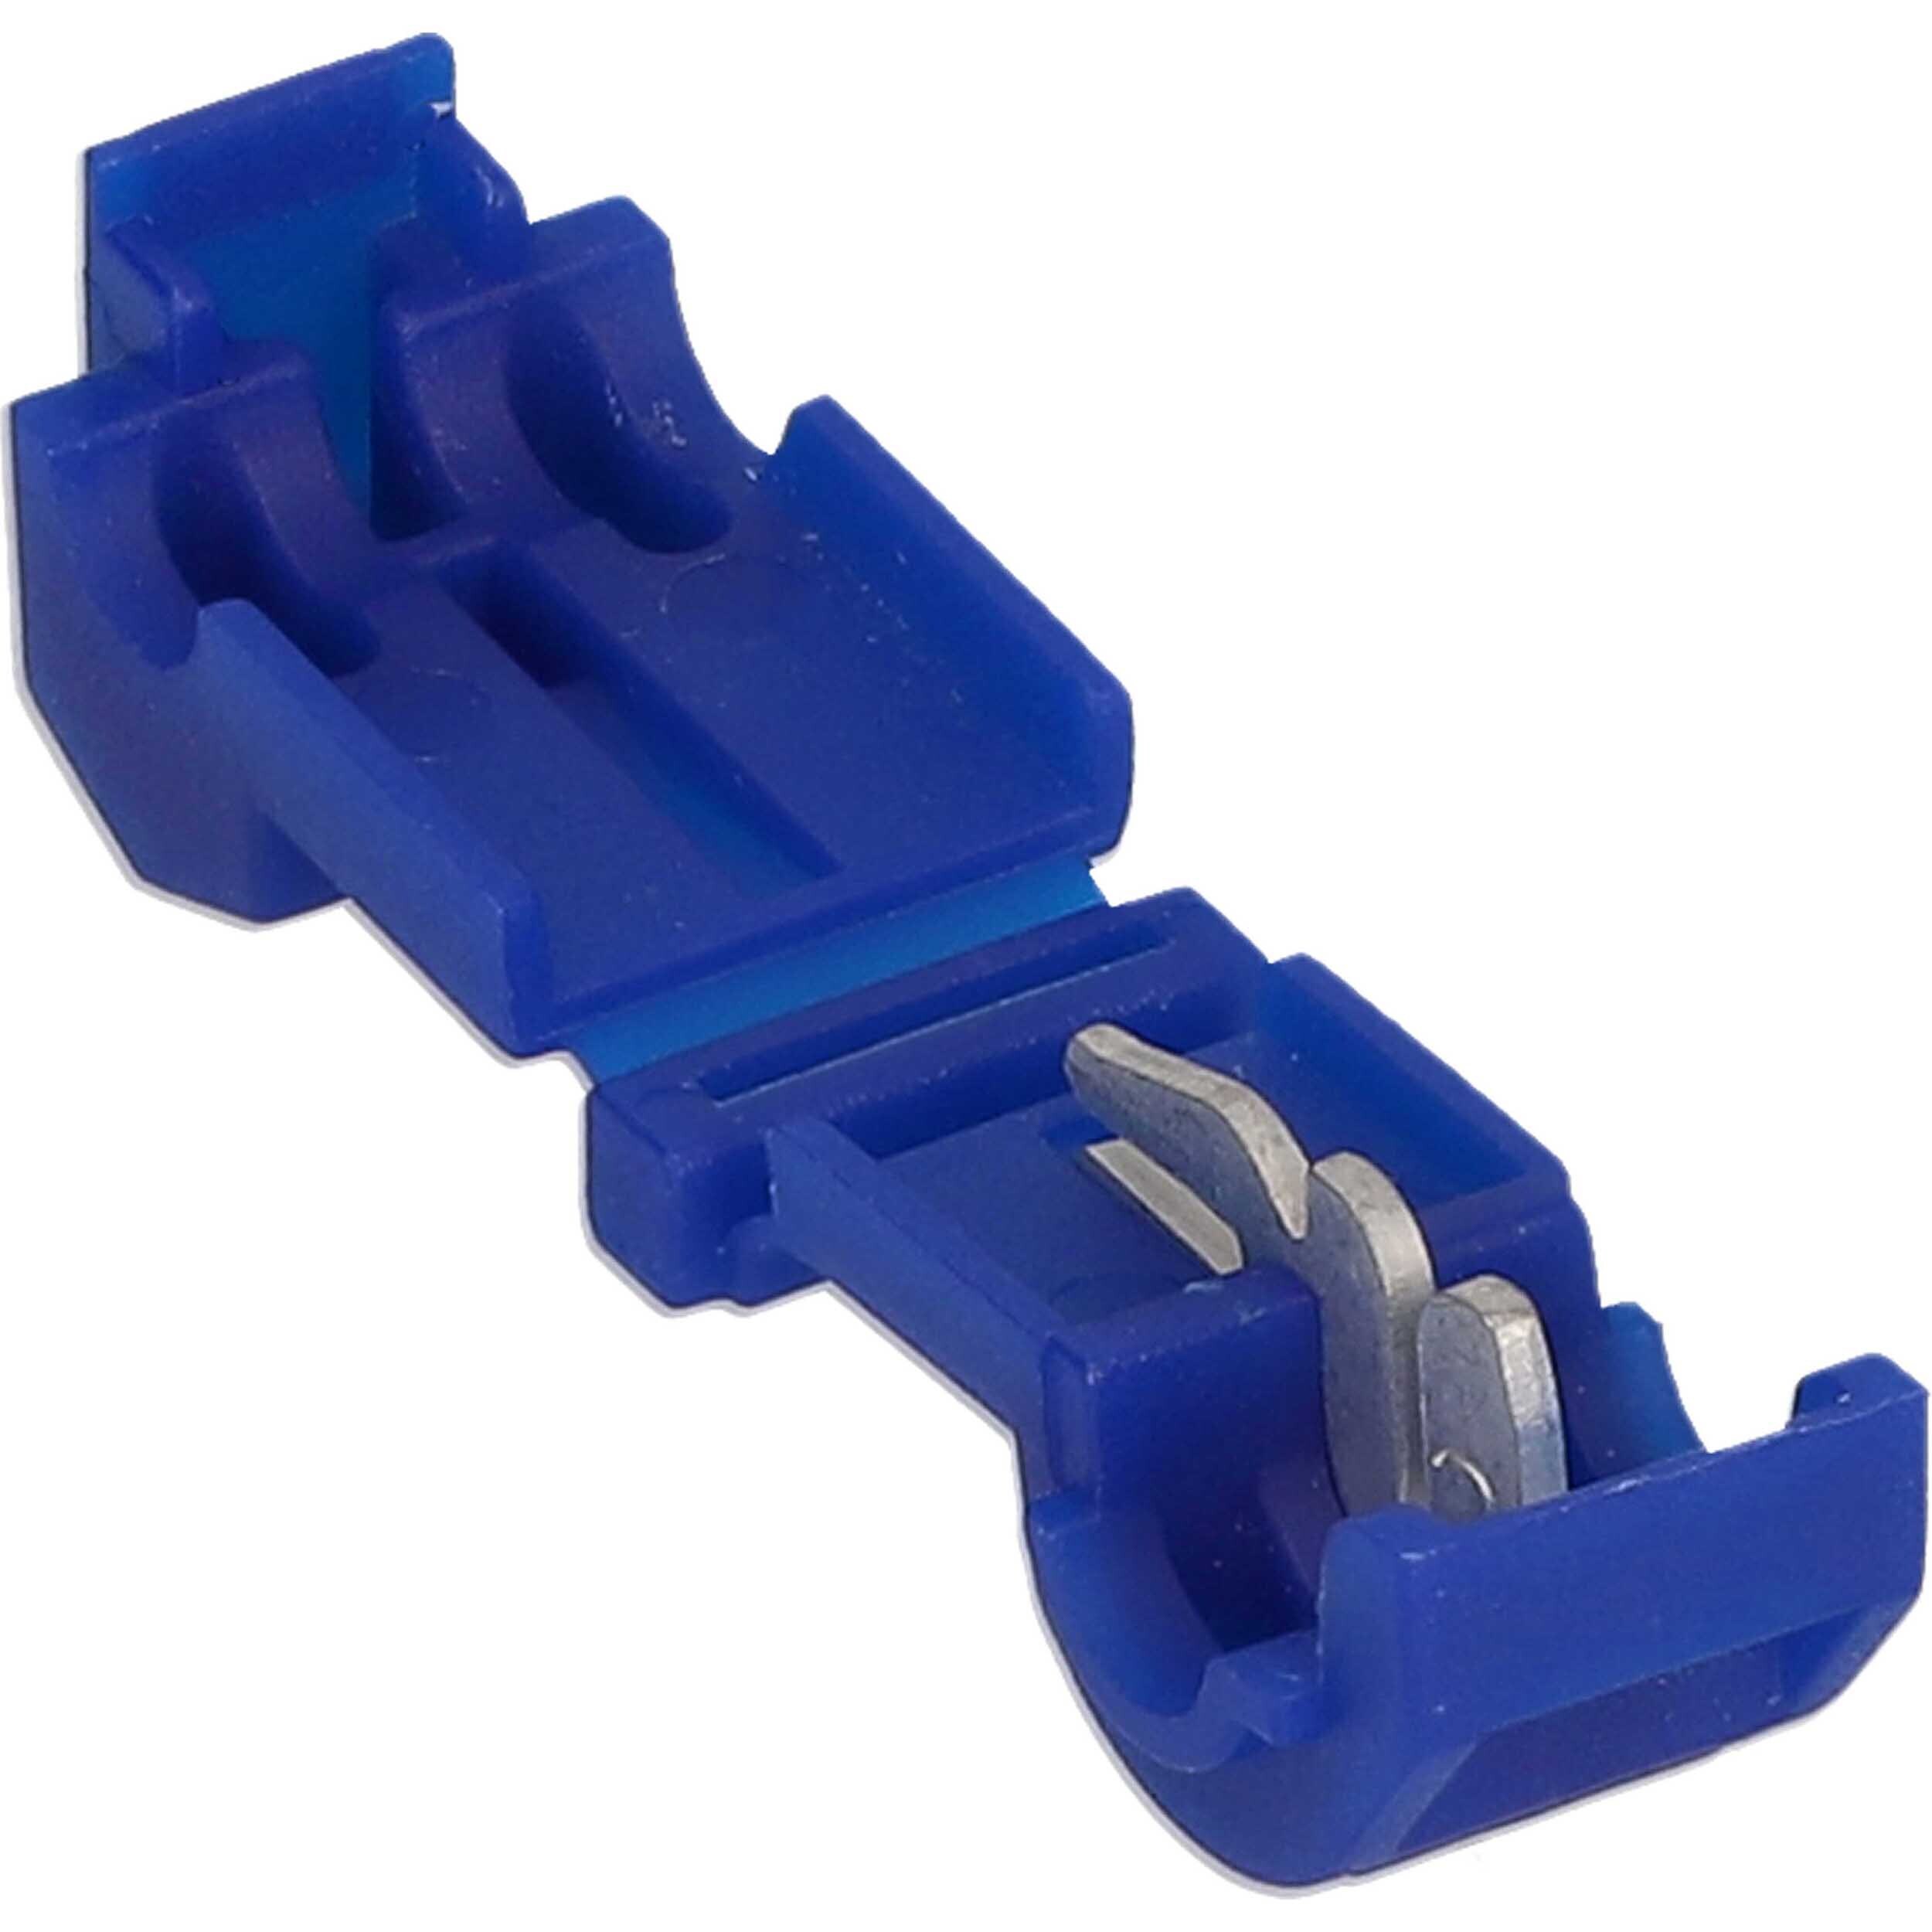 Blue Insulation Displacement Connector 16-14 Ga - 100 Pack